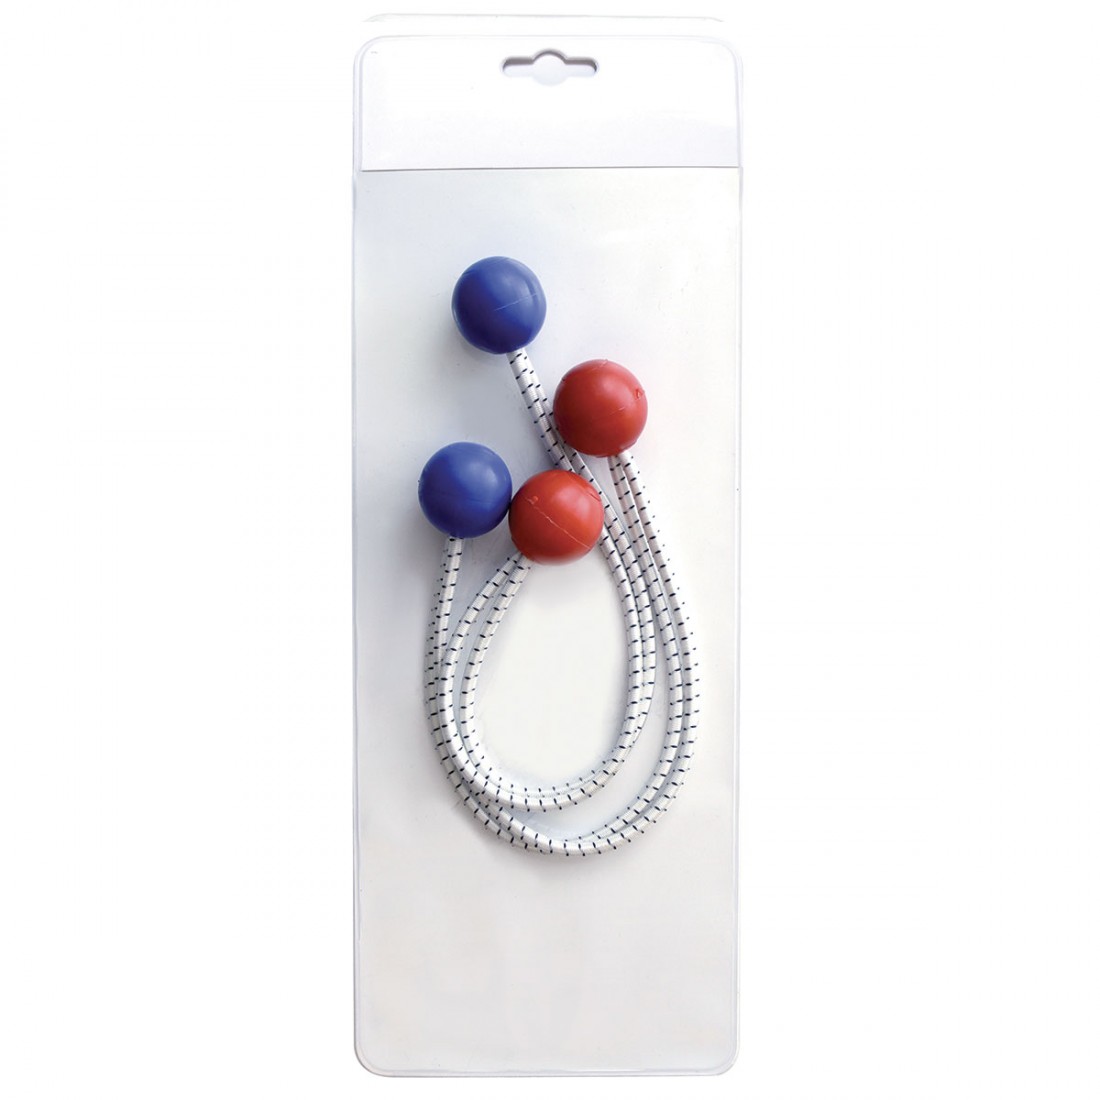 https://www.corde.it/1180-thickbox_default/sail-ties-with-balls---blister-packaging.jpg